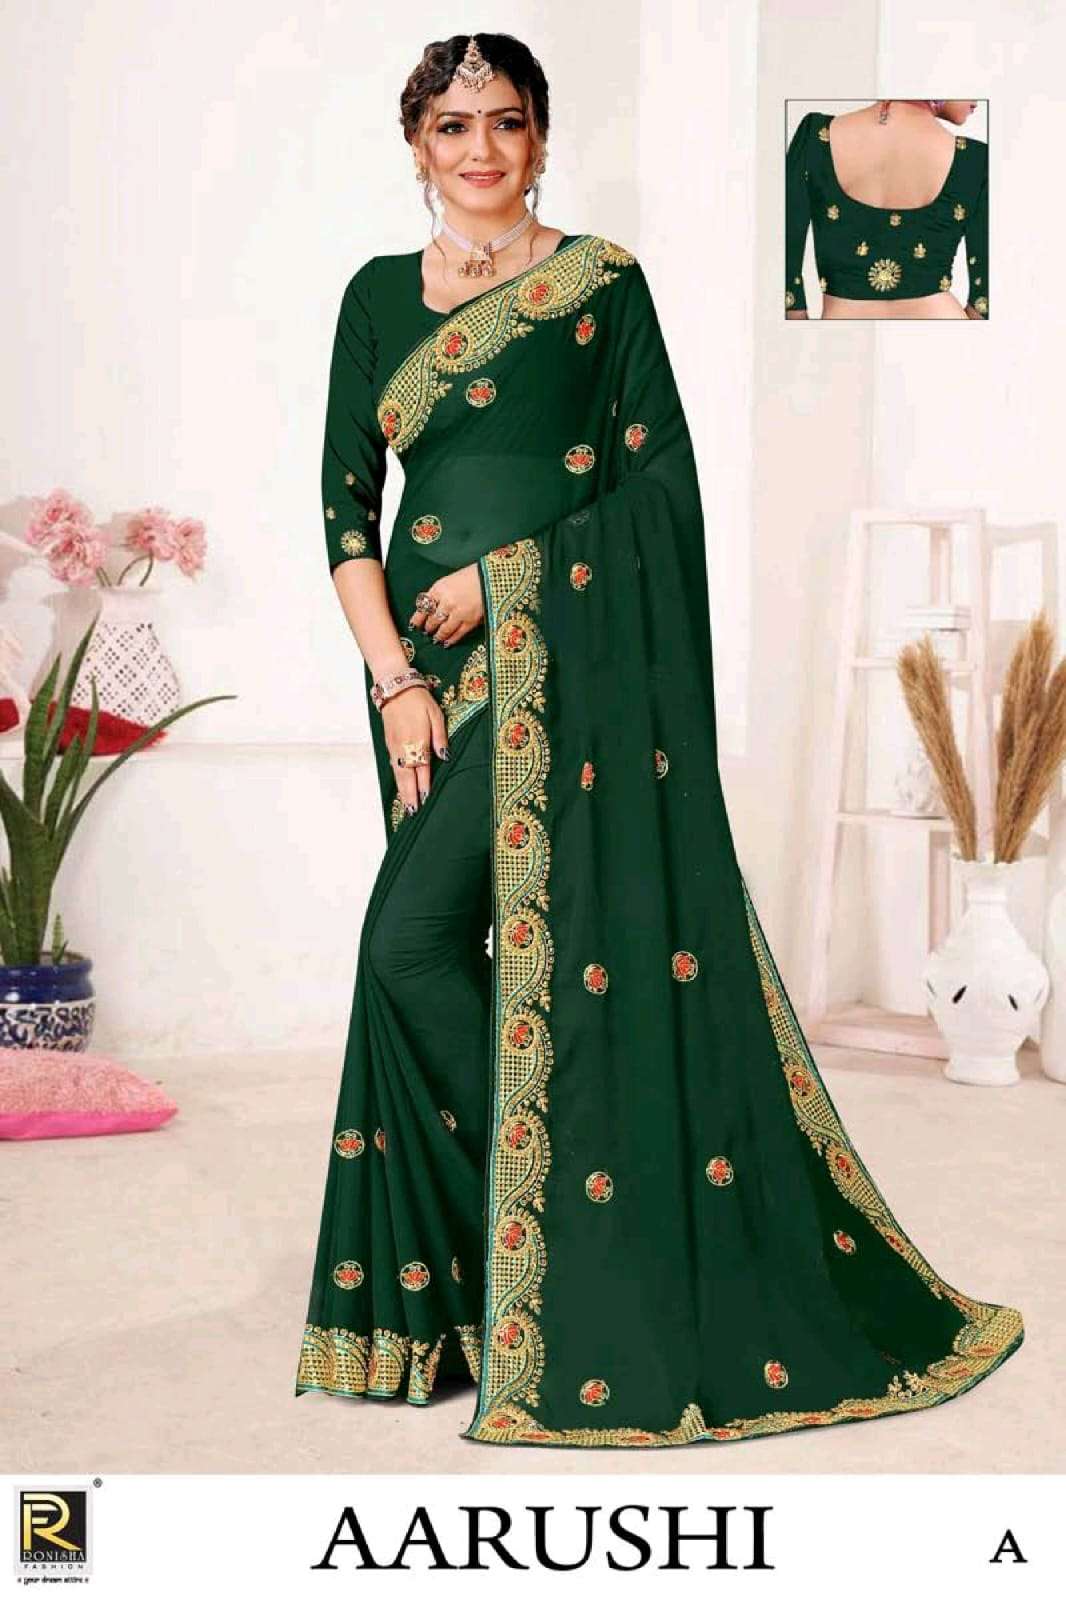 Aarushi by ranjna saree embroidery worked heavy Diamond saree collecton 